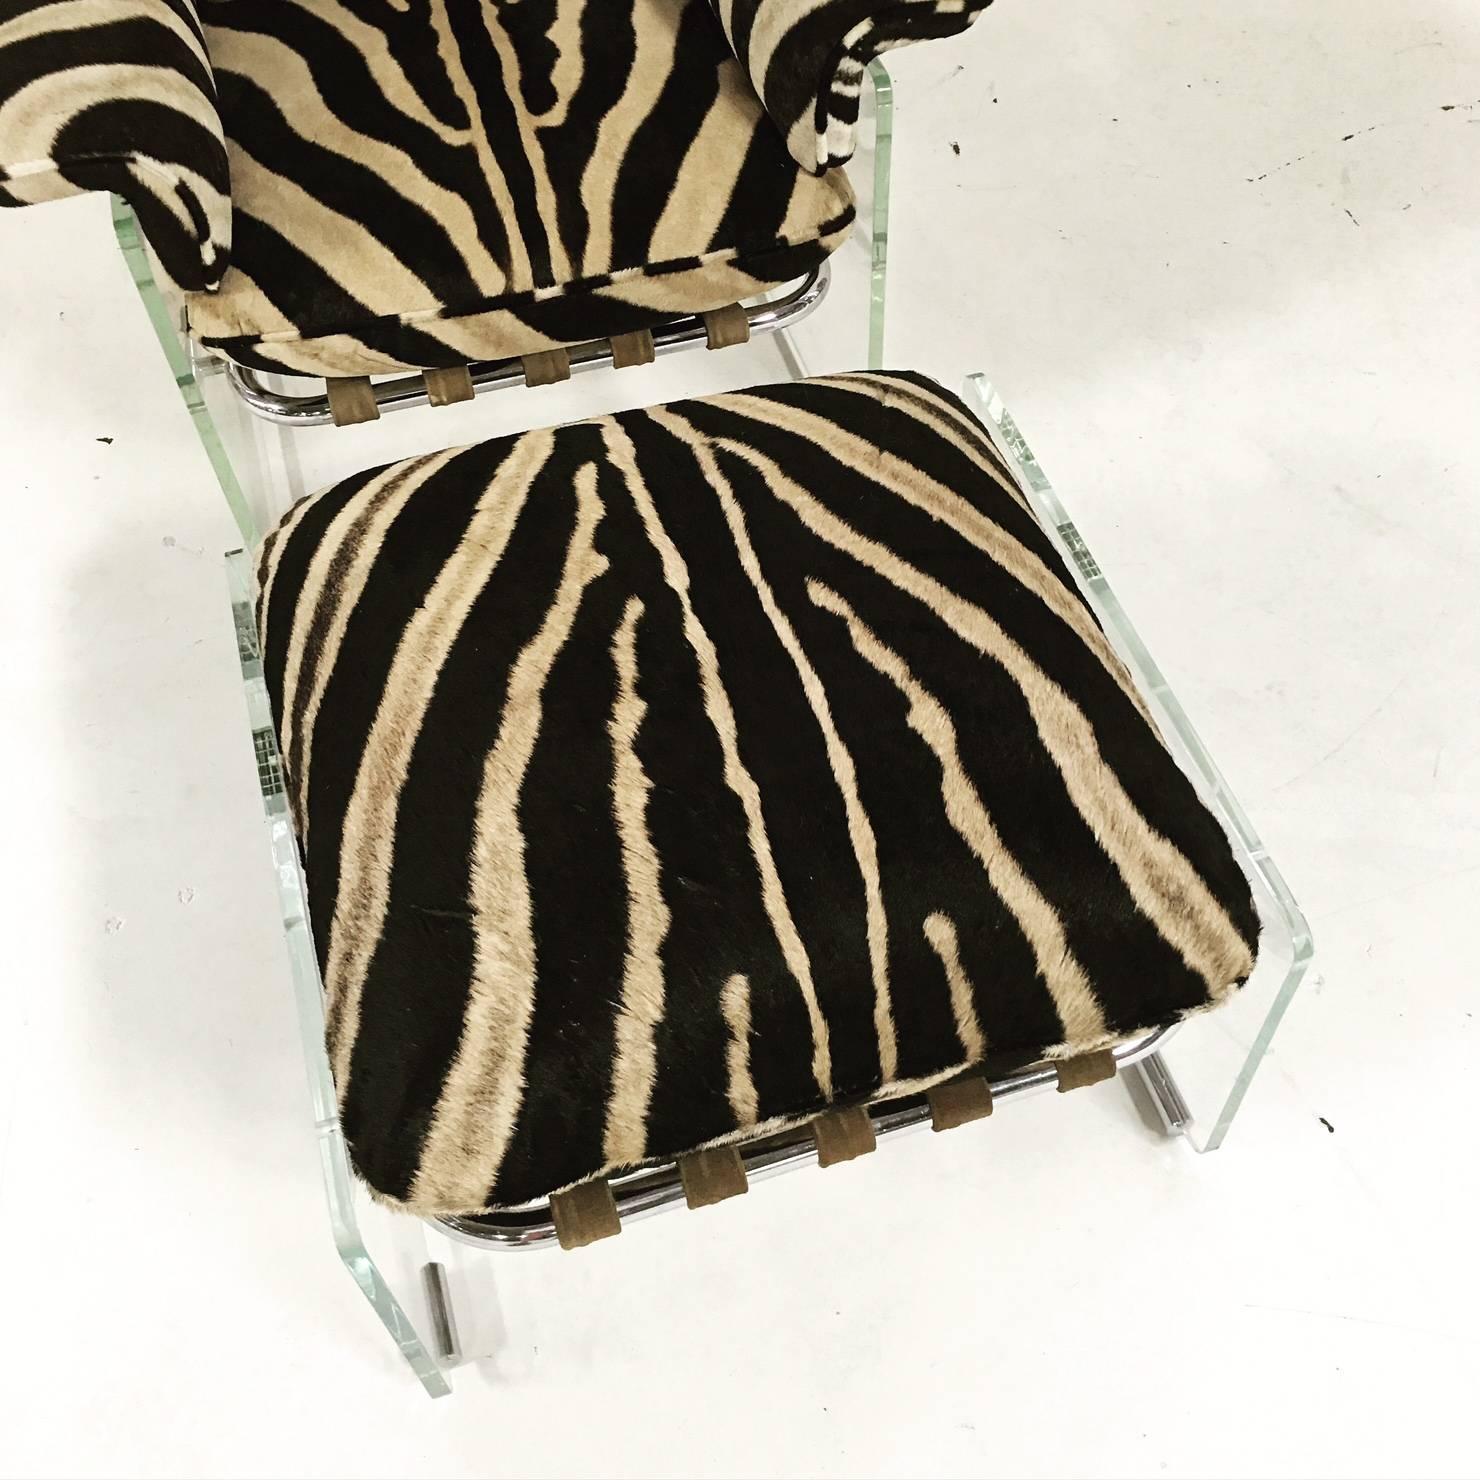 Late 20th Century Pace Collection Argenta Lucite and Chrome Lounge Chair and Ottoman in Zebra Hide